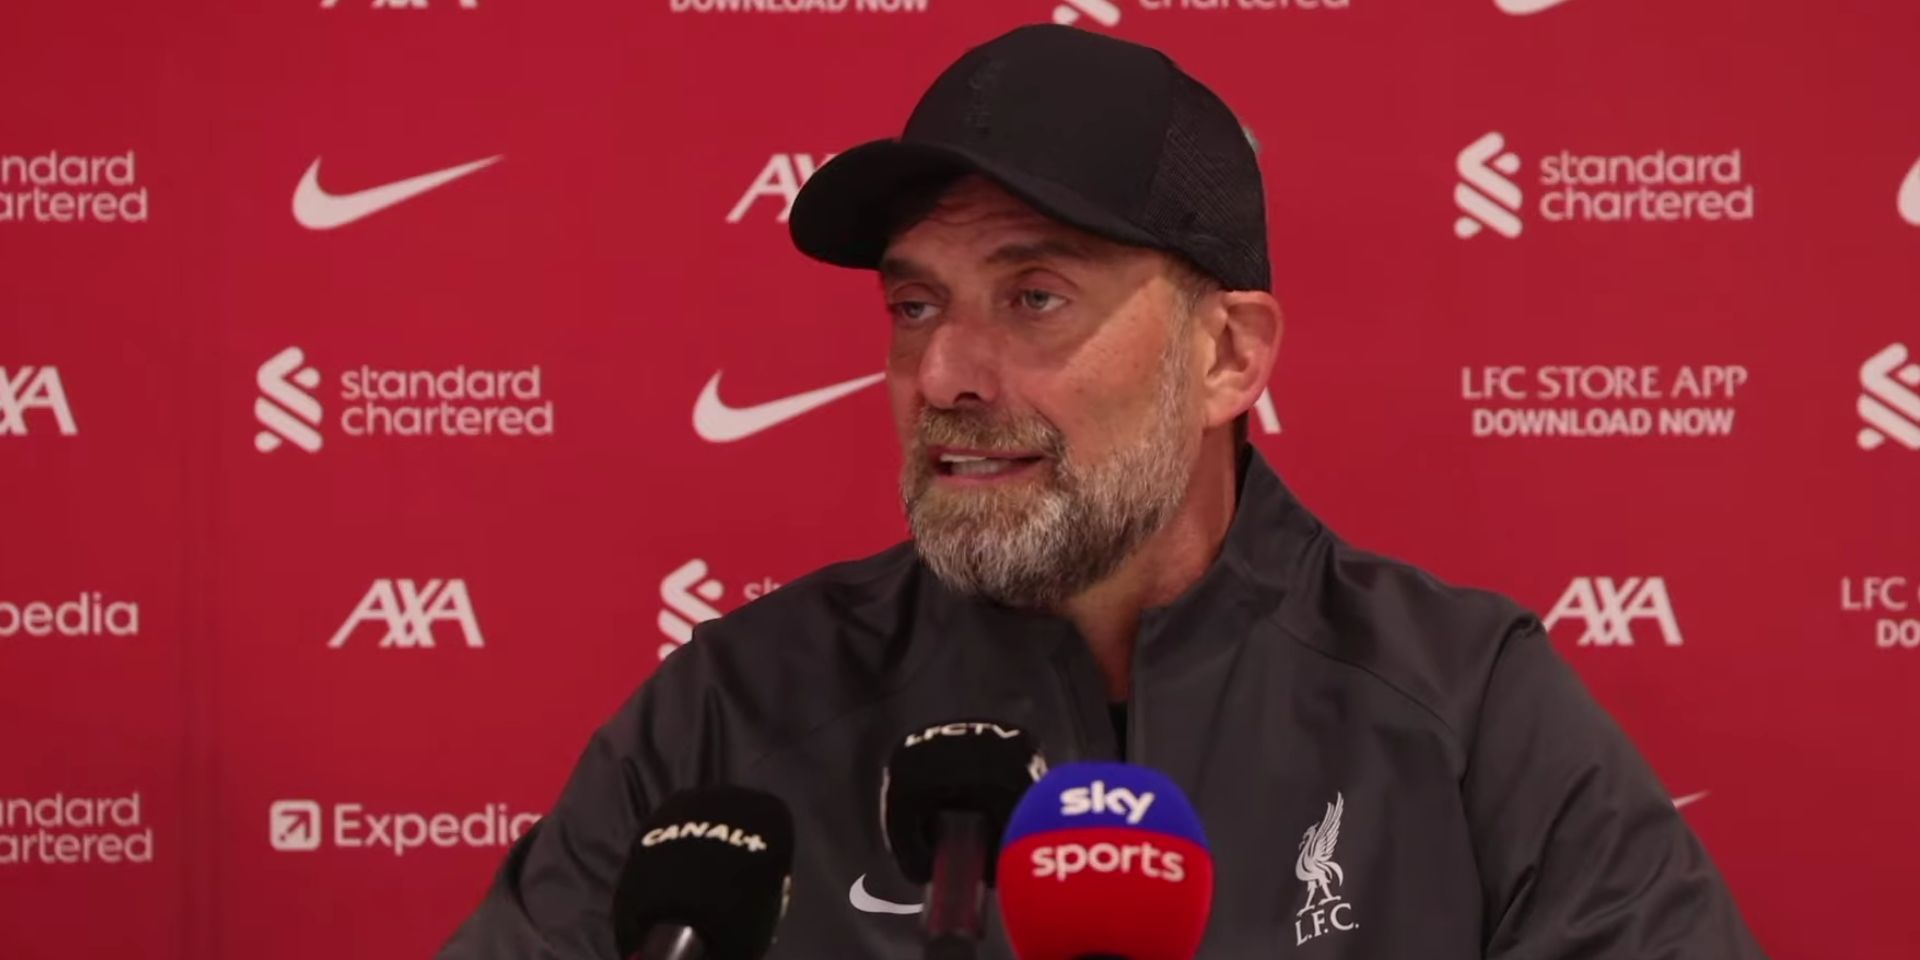 (Video) Klopp produces iconic quote about his influence on Liverpool fans